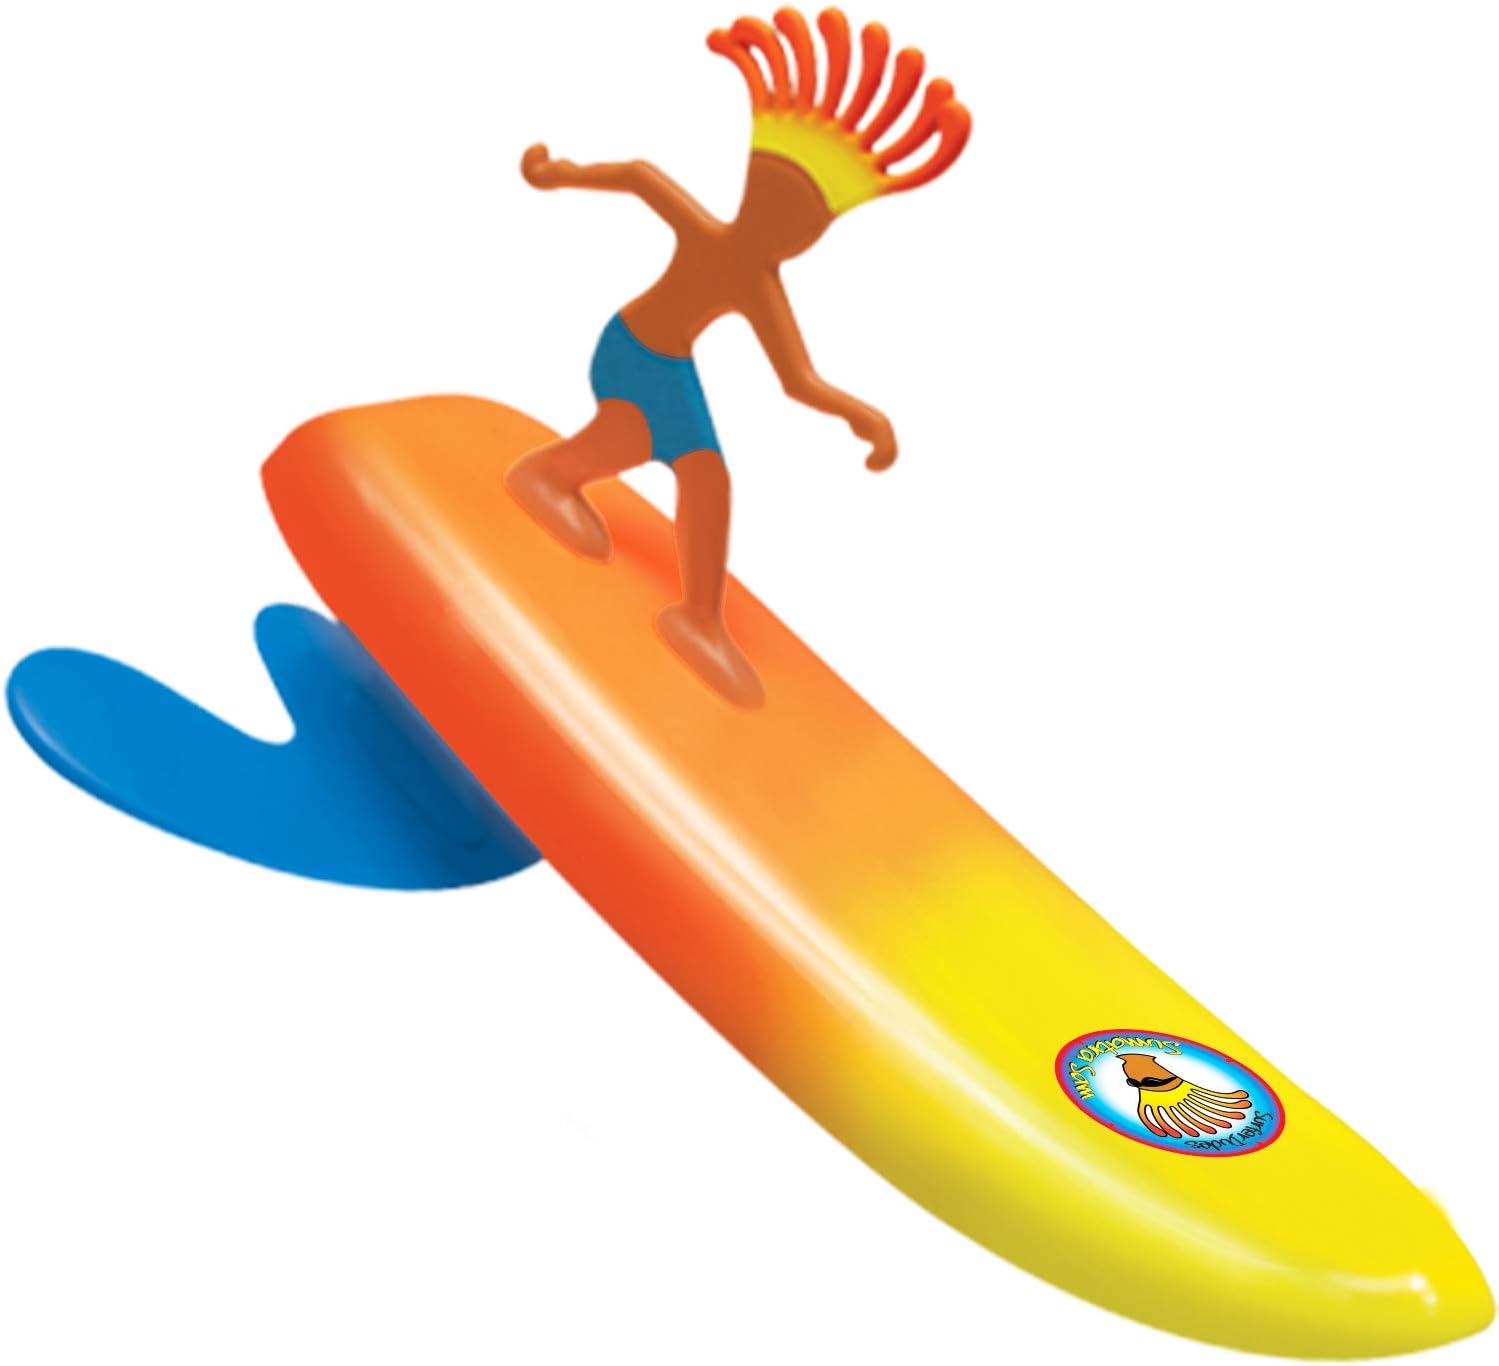 Colorful Mini-Surfer Toy 